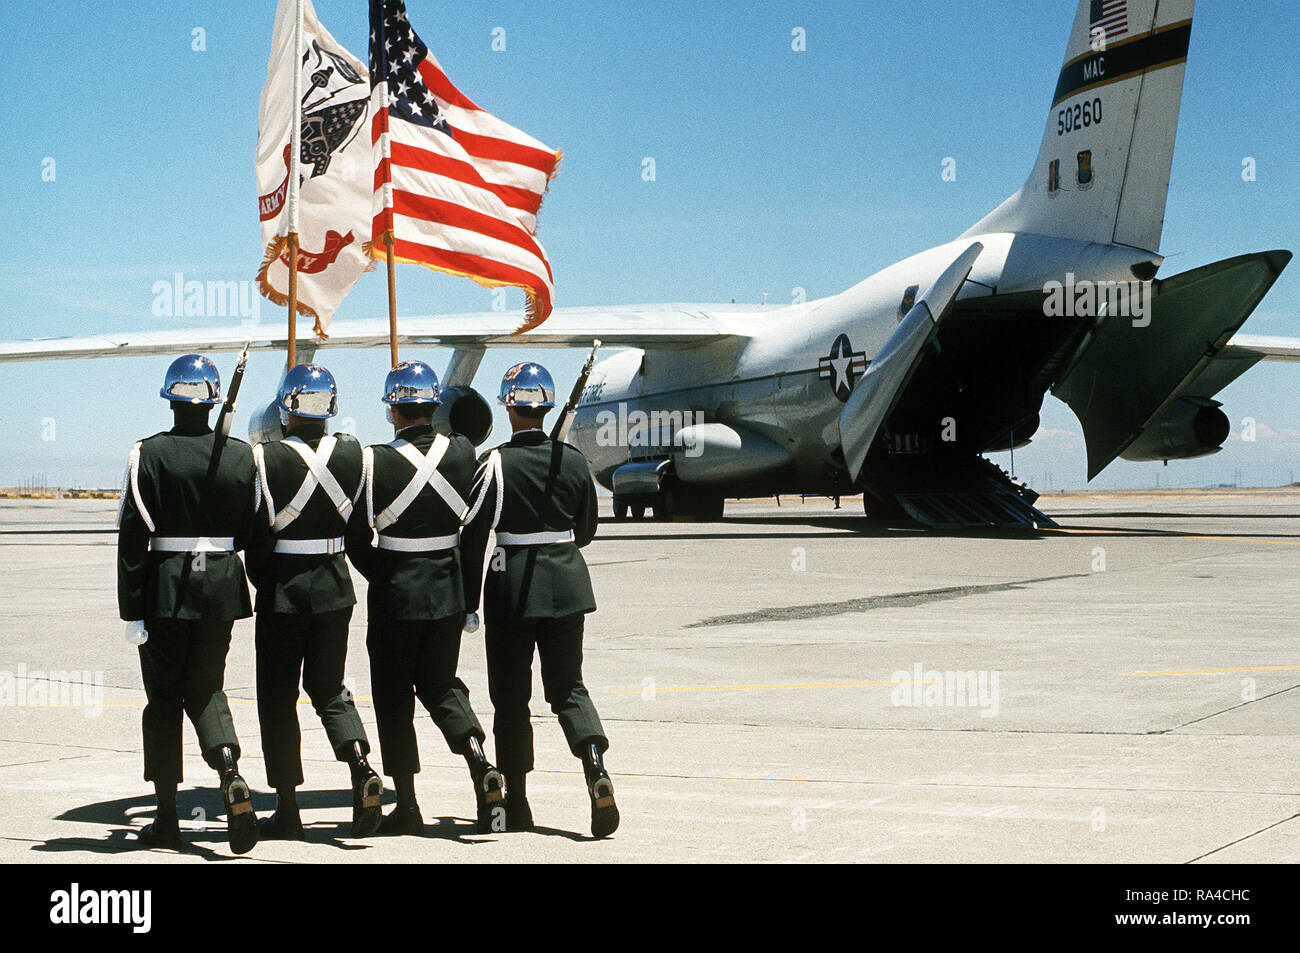 1977 - An Army color guard marches out to meet a C-141 Starlifter aircraft carrying the caskets of three U.S. Army soldiers who were killed in a helicopter crash in Korea on July 14, 1977. Stock Photo